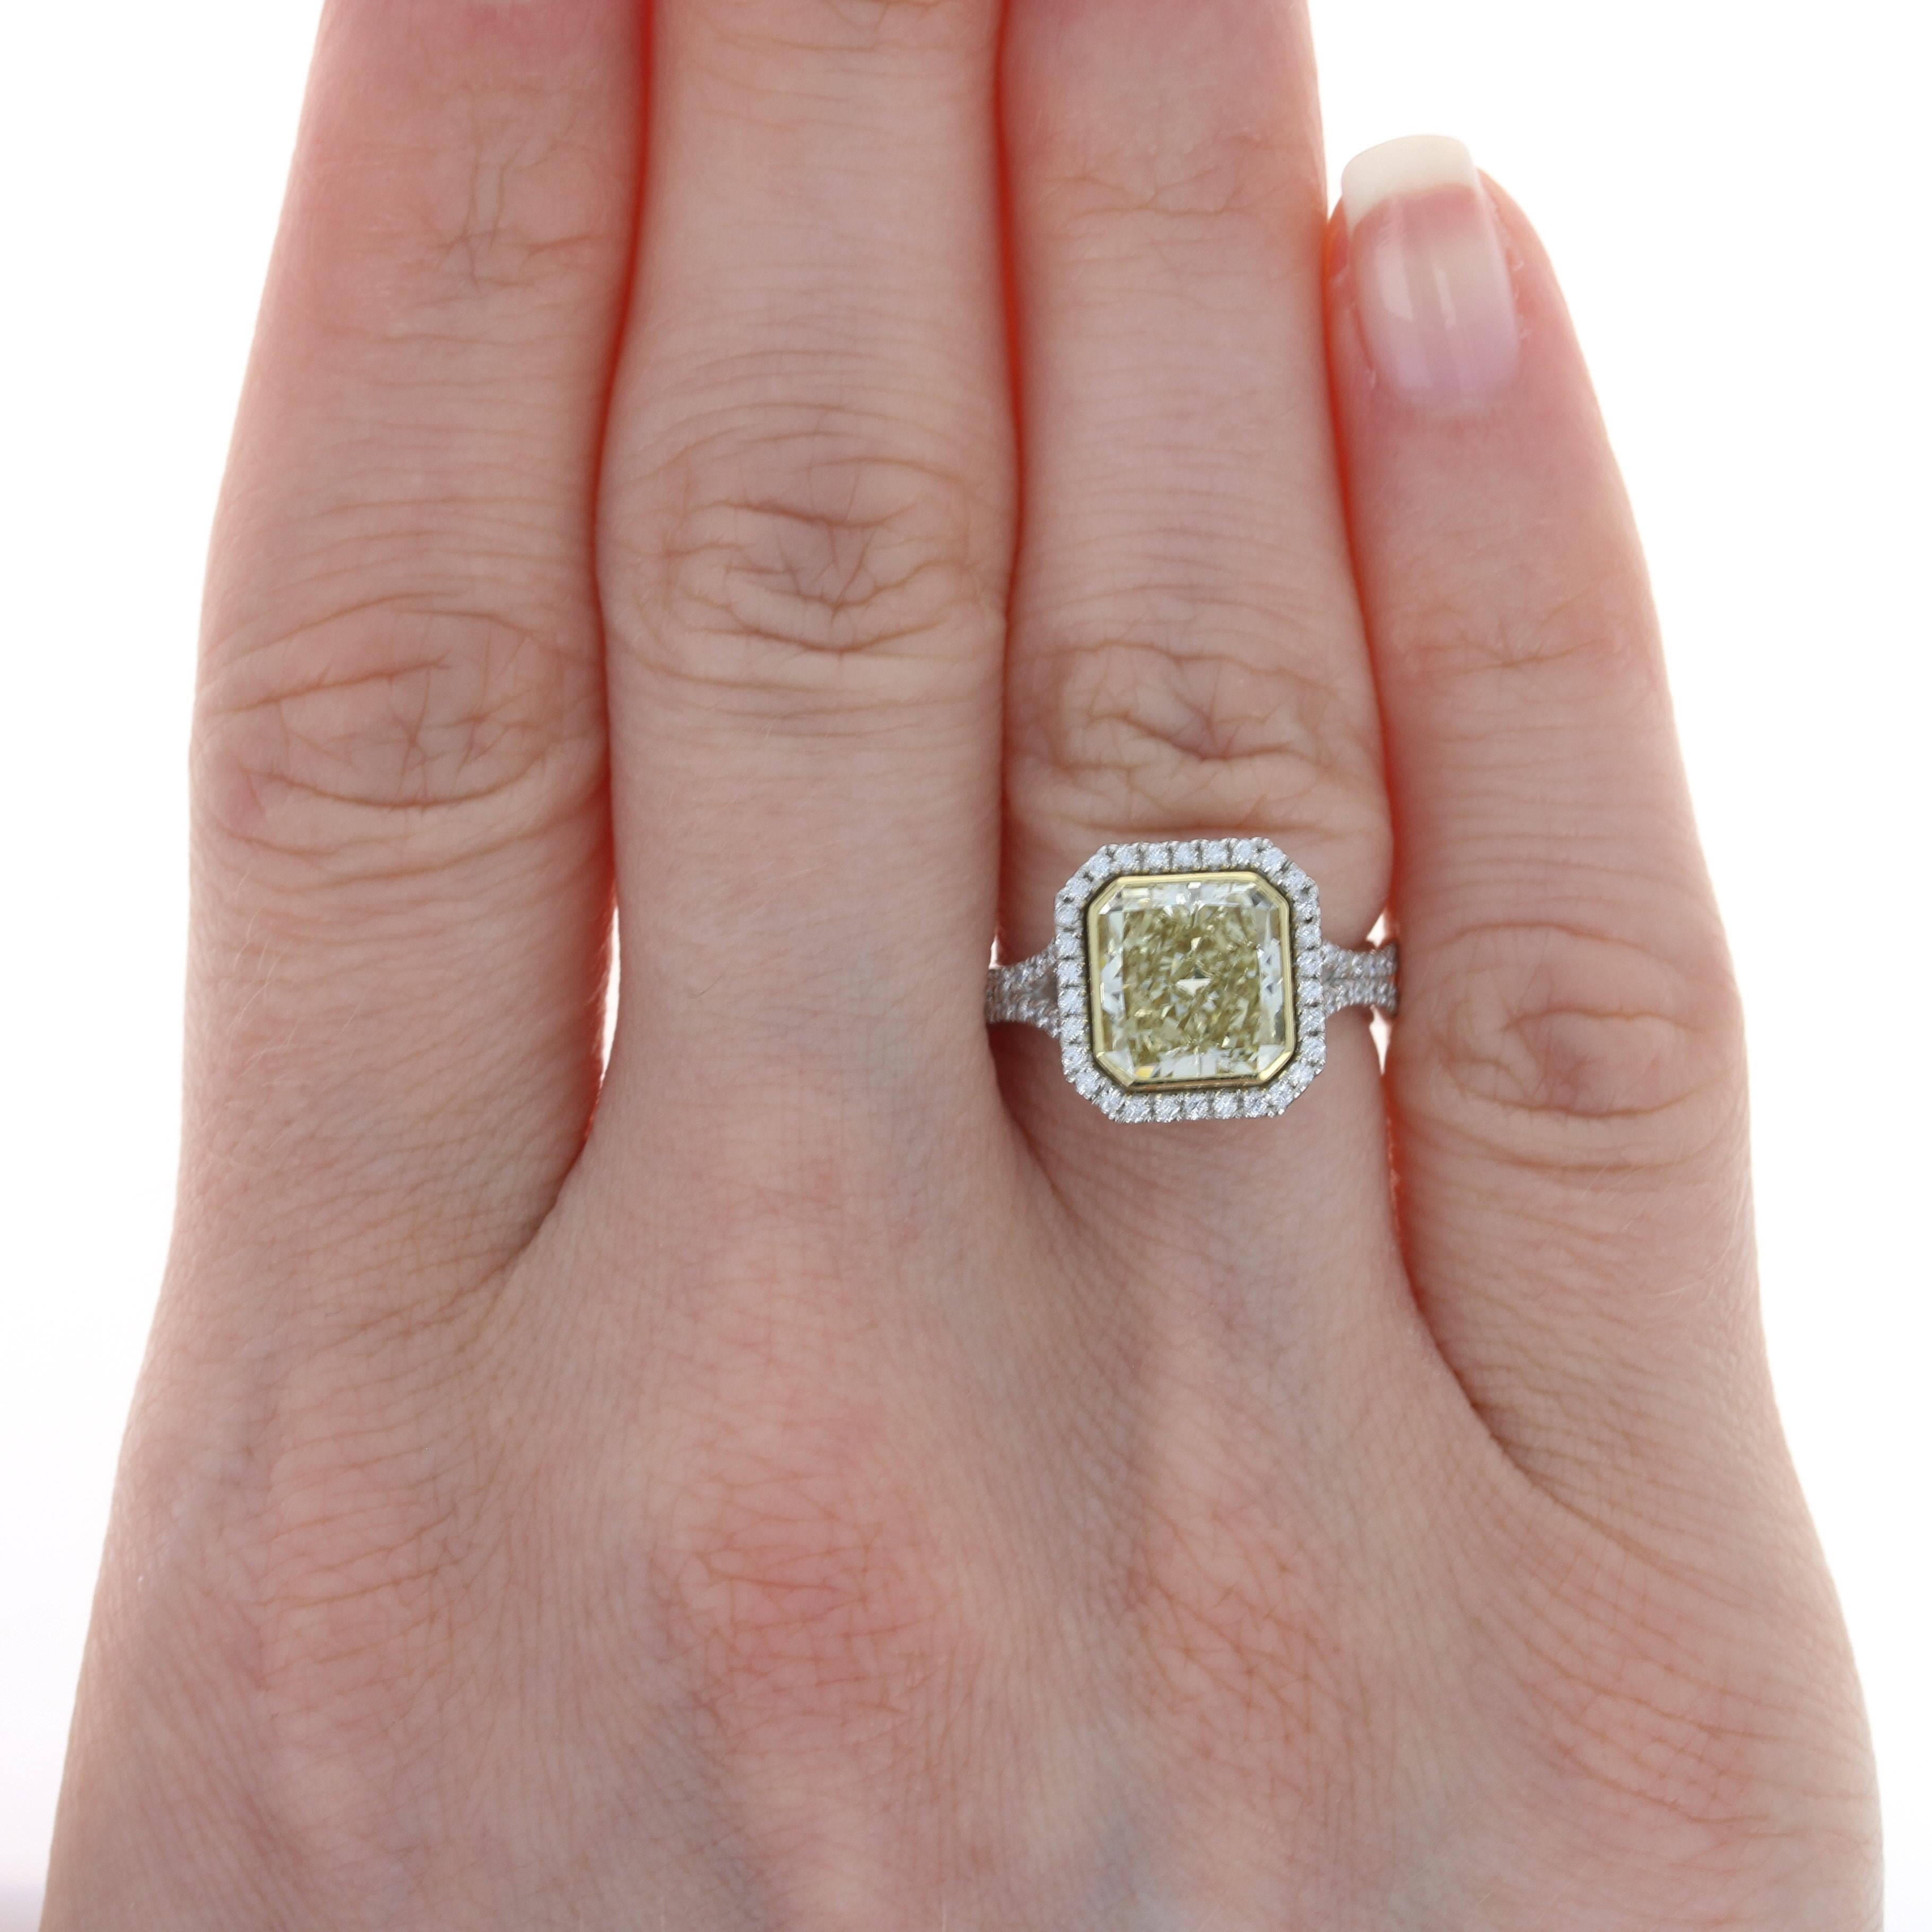 Size: 5 3/4
Please contact us for a quote on re-sizing this ring.

Metal Content: Platinum & 18k Yellow Gold 

Stone Information: 
Natural Diamond Solitaire
Carat: 2.74ct
Cut: Radiant 
Color: Fancy Yellow (fancy brownish greenish yellow, even